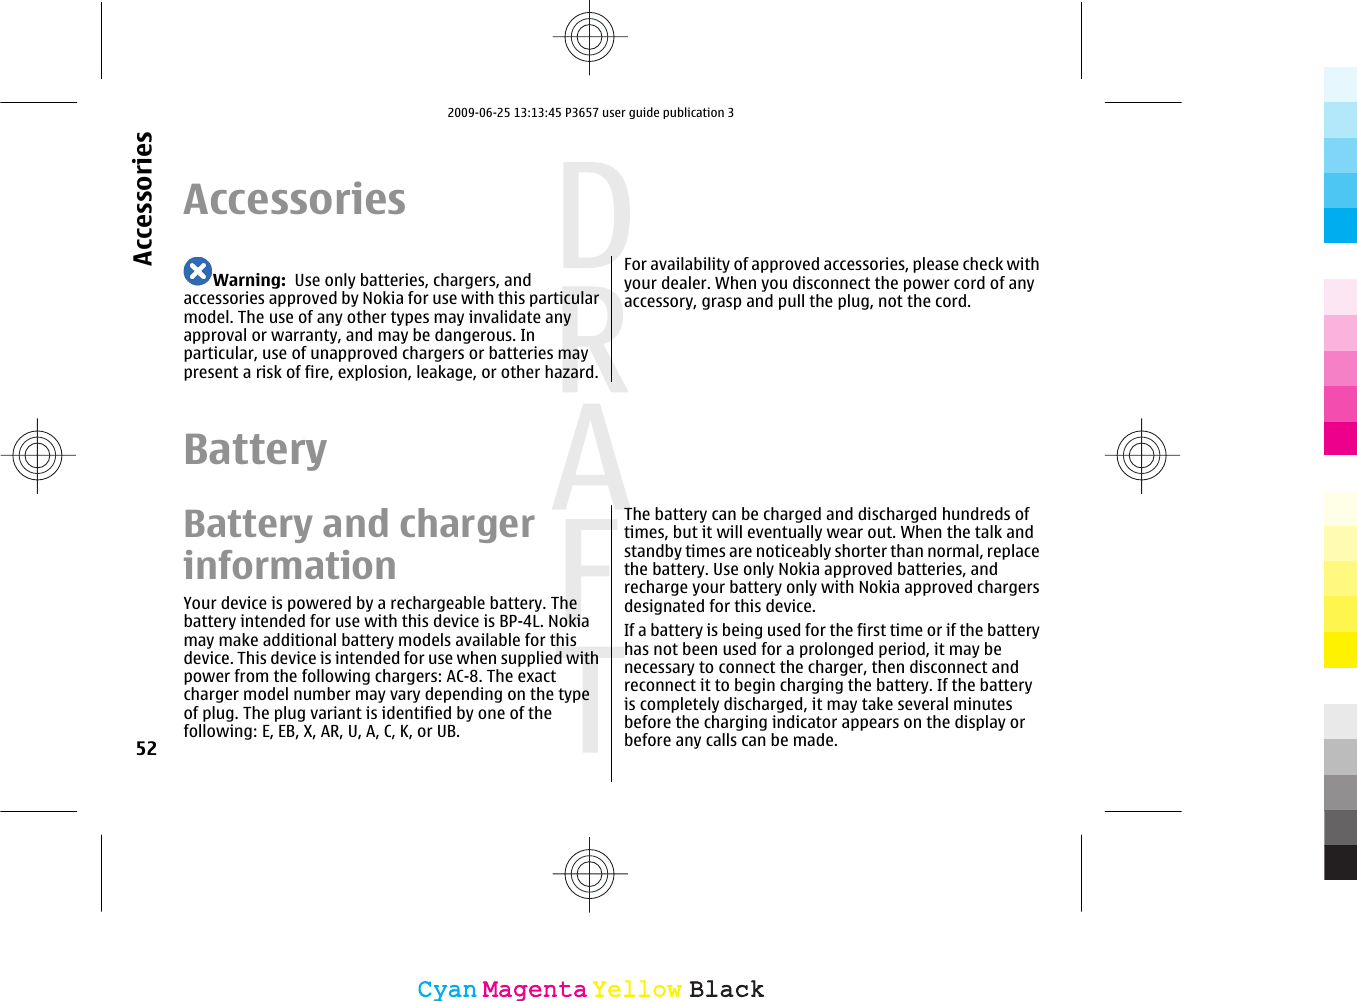 AccessoriesWarning:  Use only batteries, chargers, andaccessories approved by Nokia for use with this particularmodel. The use of any other types may invalidate anyapproval or warranty, and may be dangerous. Inparticular, use of unapproved chargers or batteries maypresent a risk of fire, explosion, leakage, or other hazard.For availability of approved accessories, please check withyour dealer. When you disconnect the power cord of anyaccessory, grasp and pull the plug, not the cord.BatteryBattery and chargerinformationYour device is powered by a rechargeable battery. Thebattery intended for use with this device is BP-4L. Nokiamay make additional battery models available for thisdevice. This device is intended for use when supplied withpower from the following chargers: AC-8. The exactcharger model number may vary depending on the typeof plug. The plug variant is identified by one of thefollowing: E, EB, X, AR, U, A, C, K, or UB.The battery can be charged and discharged hundreds oftimes, but it will eventually wear out. When the talk andstandby times are noticeably shorter than normal, replacethe battery. Use only Nokia approved batteries, andrecharge your battery only with Nokia approved chargersdesignated for this device.If a battery is being used for the first time or if the batteryhas not been used for a prolonged period, it may benecessary to connect the charger, then disconnect andreconnect it to begin charging the battery. If the batteryis completely discharged, it may take several minutesbefore the charging indicator appears on the display orbefore any calls can be made.52AccessoriesCyanCyanMagentaMagentaYellowYellowBlackBlack2009-06-25 13:13:45 P3657 user guide publication 3